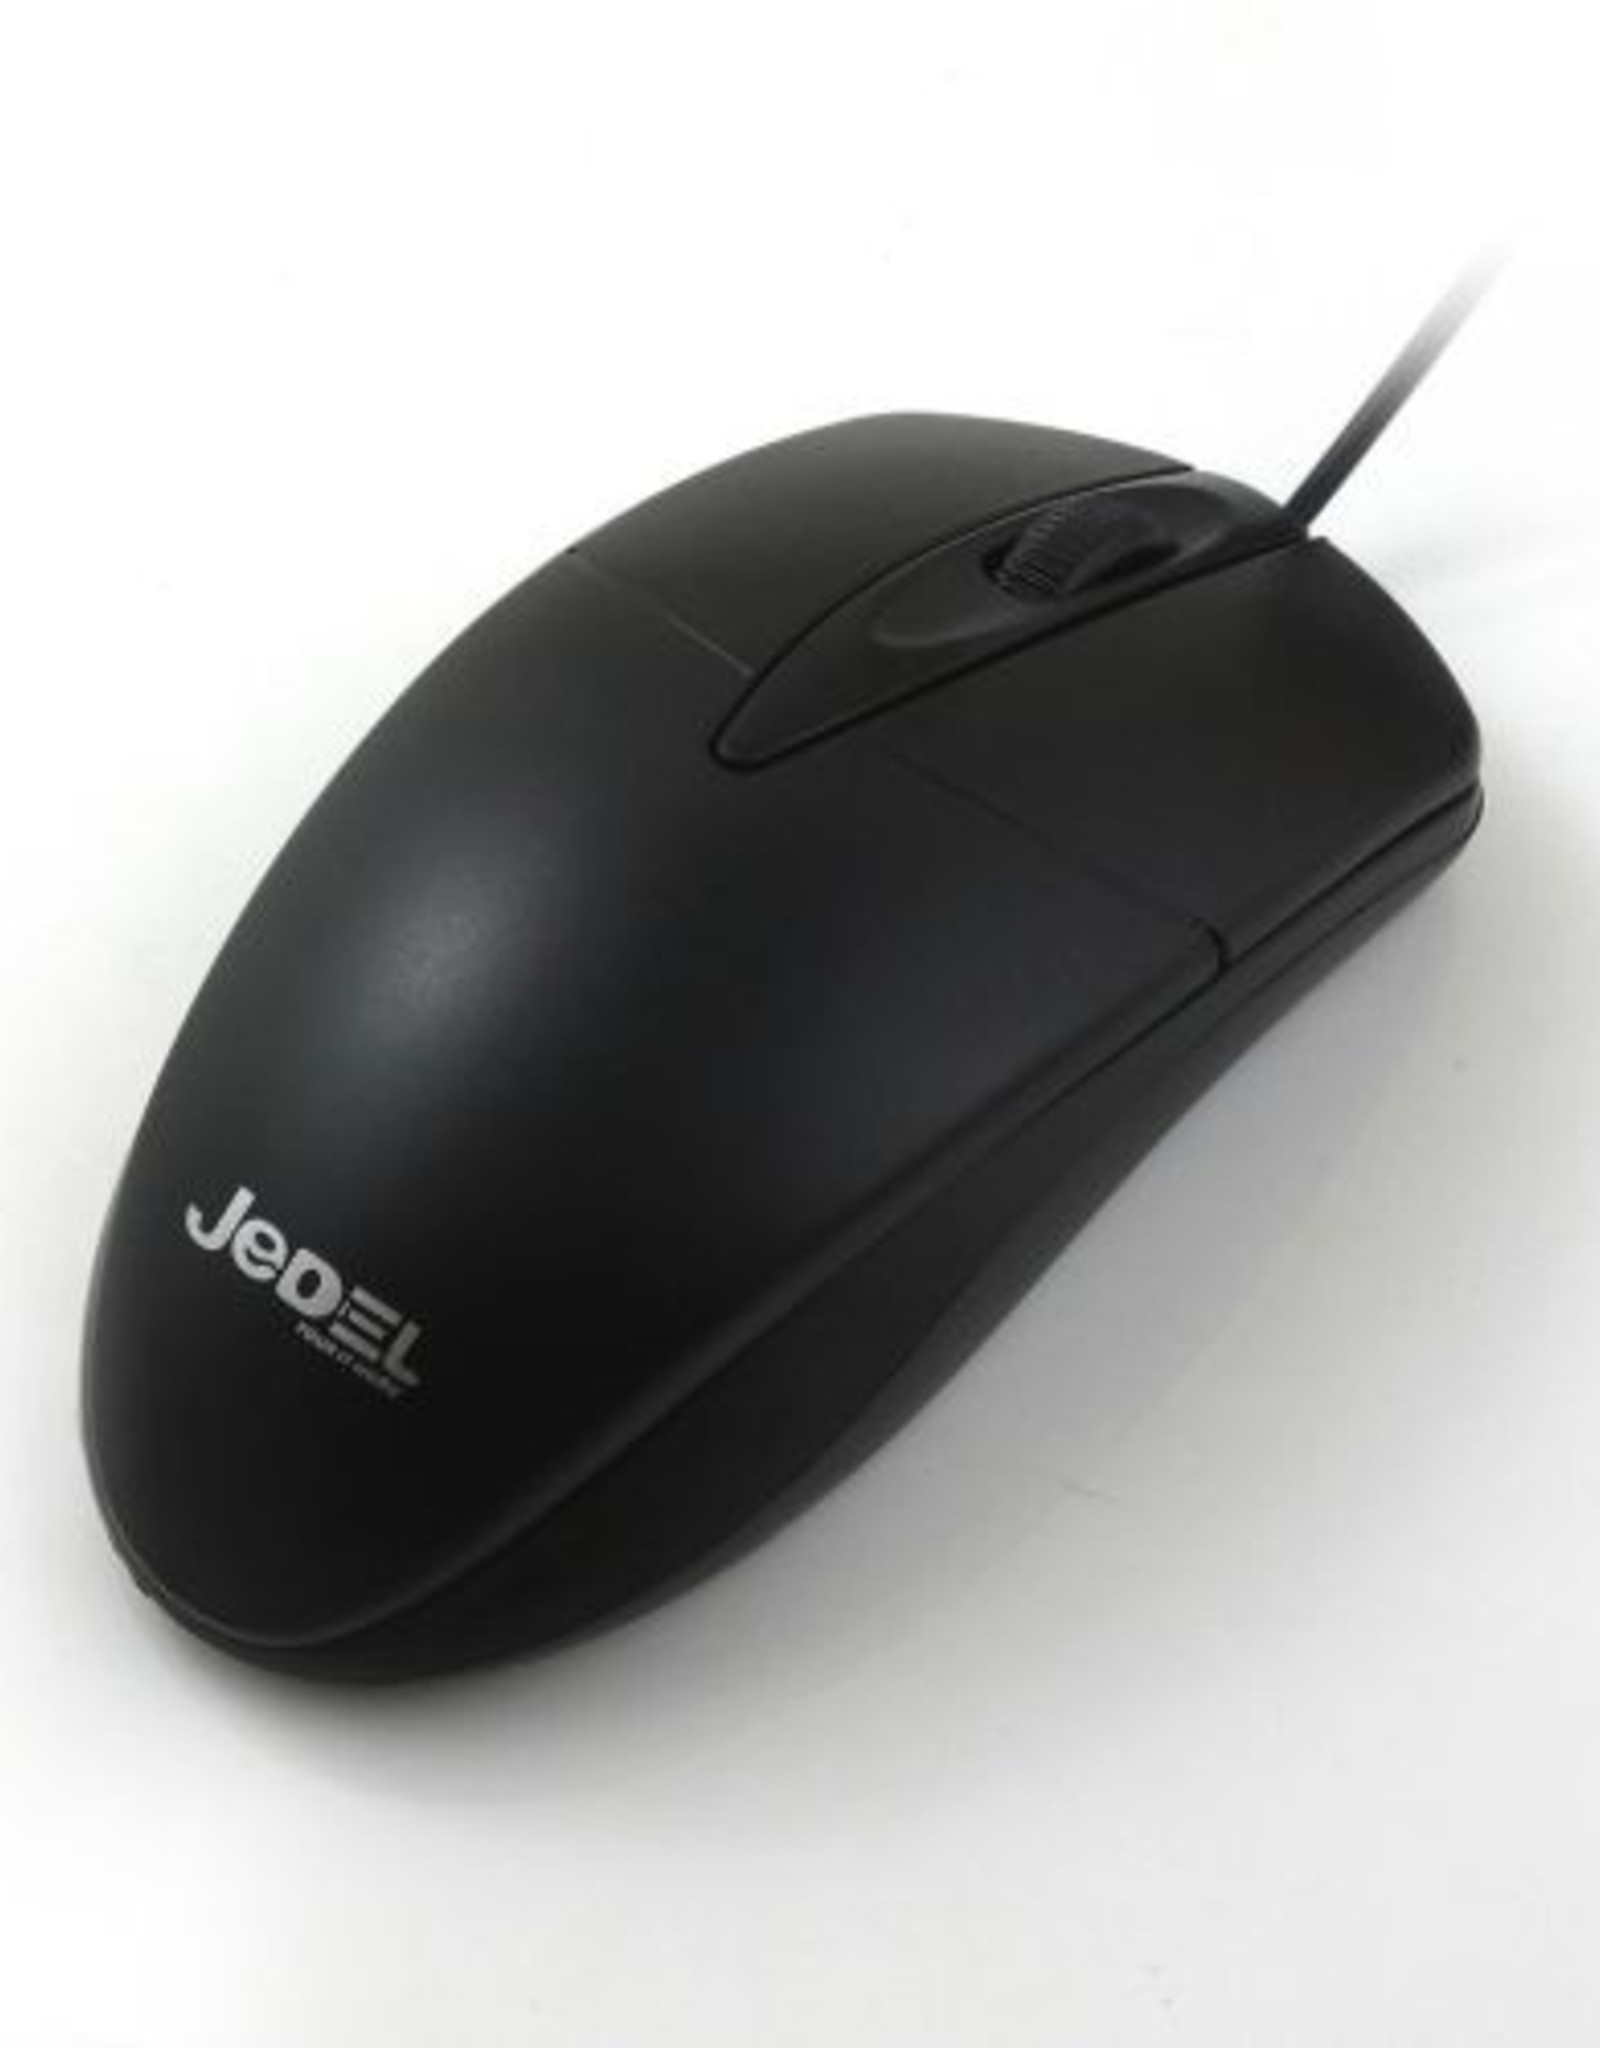 JEDEL JEDEL CP72 USB WIRED OPTICAL MOUSE, 1000DPI, BLACK